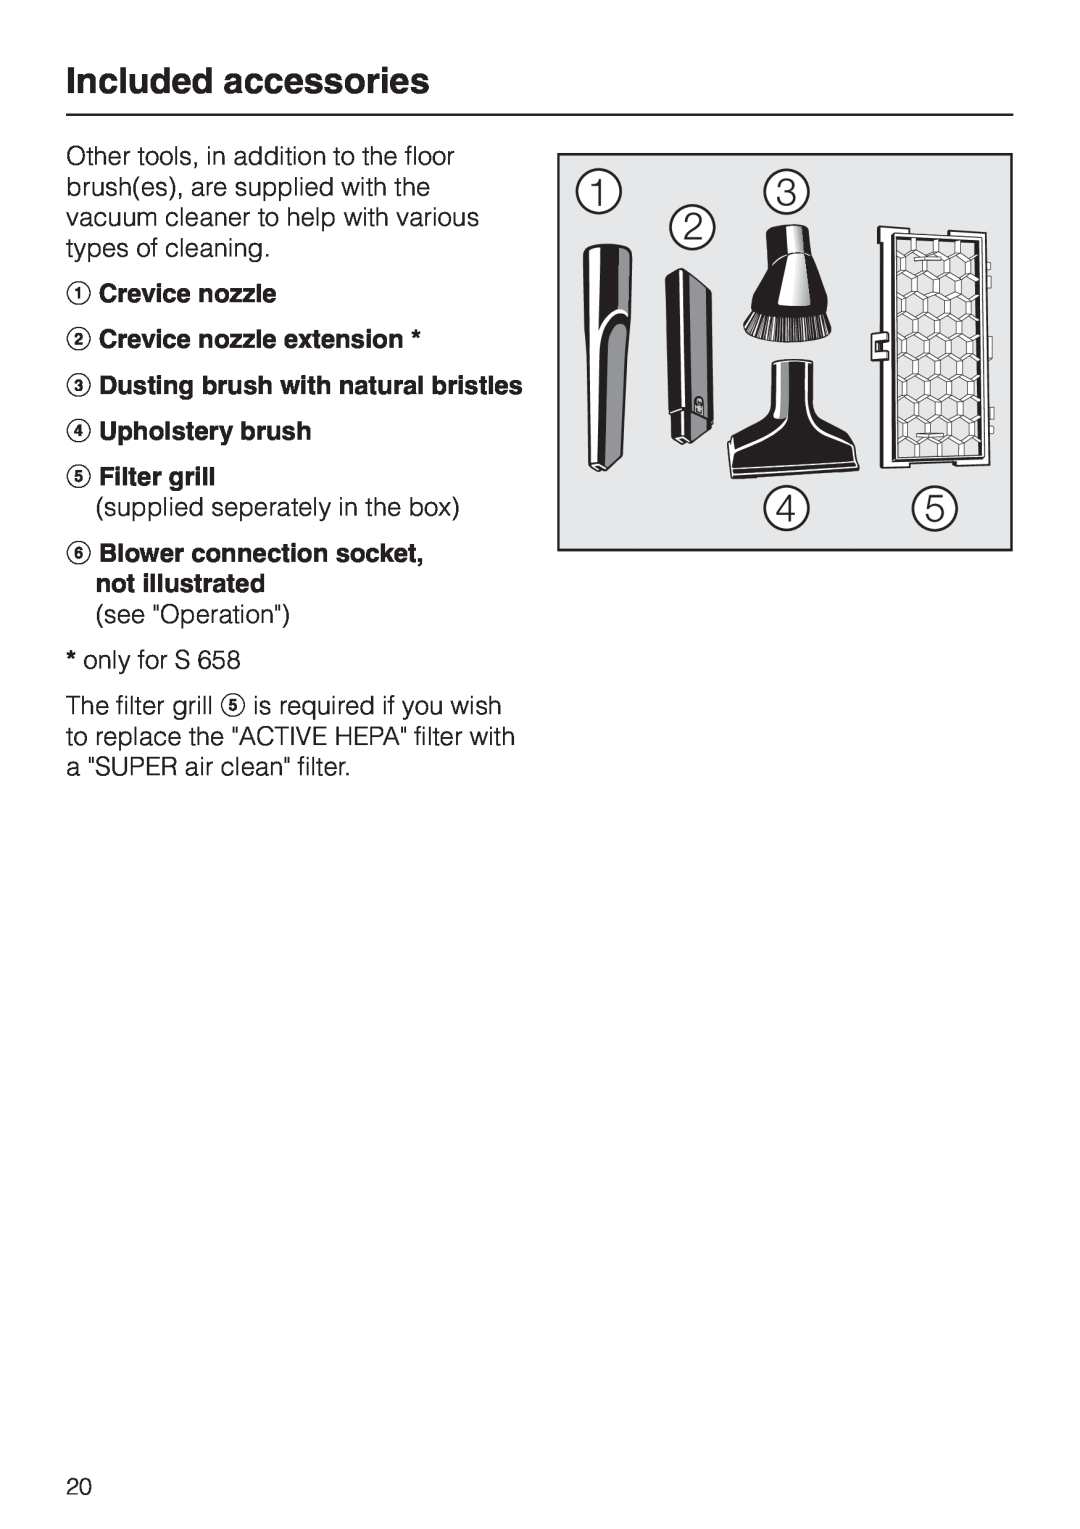 Miele S 558 manual Included accessories, a Crevice nozzle b Crevice nozzle extension, e Filter grill 